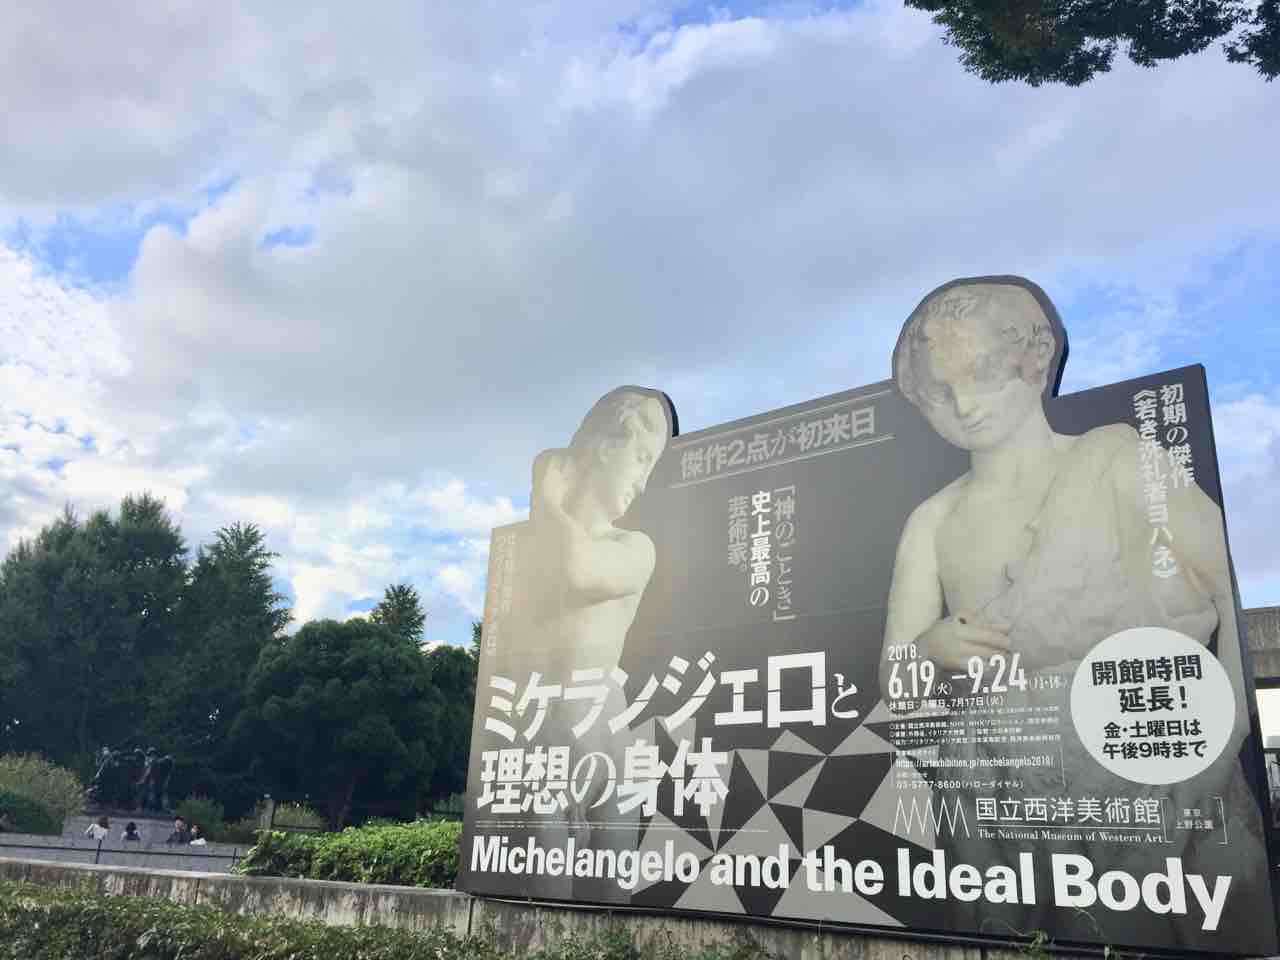 Michelangelo ミケランジェロと理想の身体展 ローマの景観 Views Of Rome Transition In Images And Media 於上野公園 国立西洋美術館 Ousia Web Design For Life